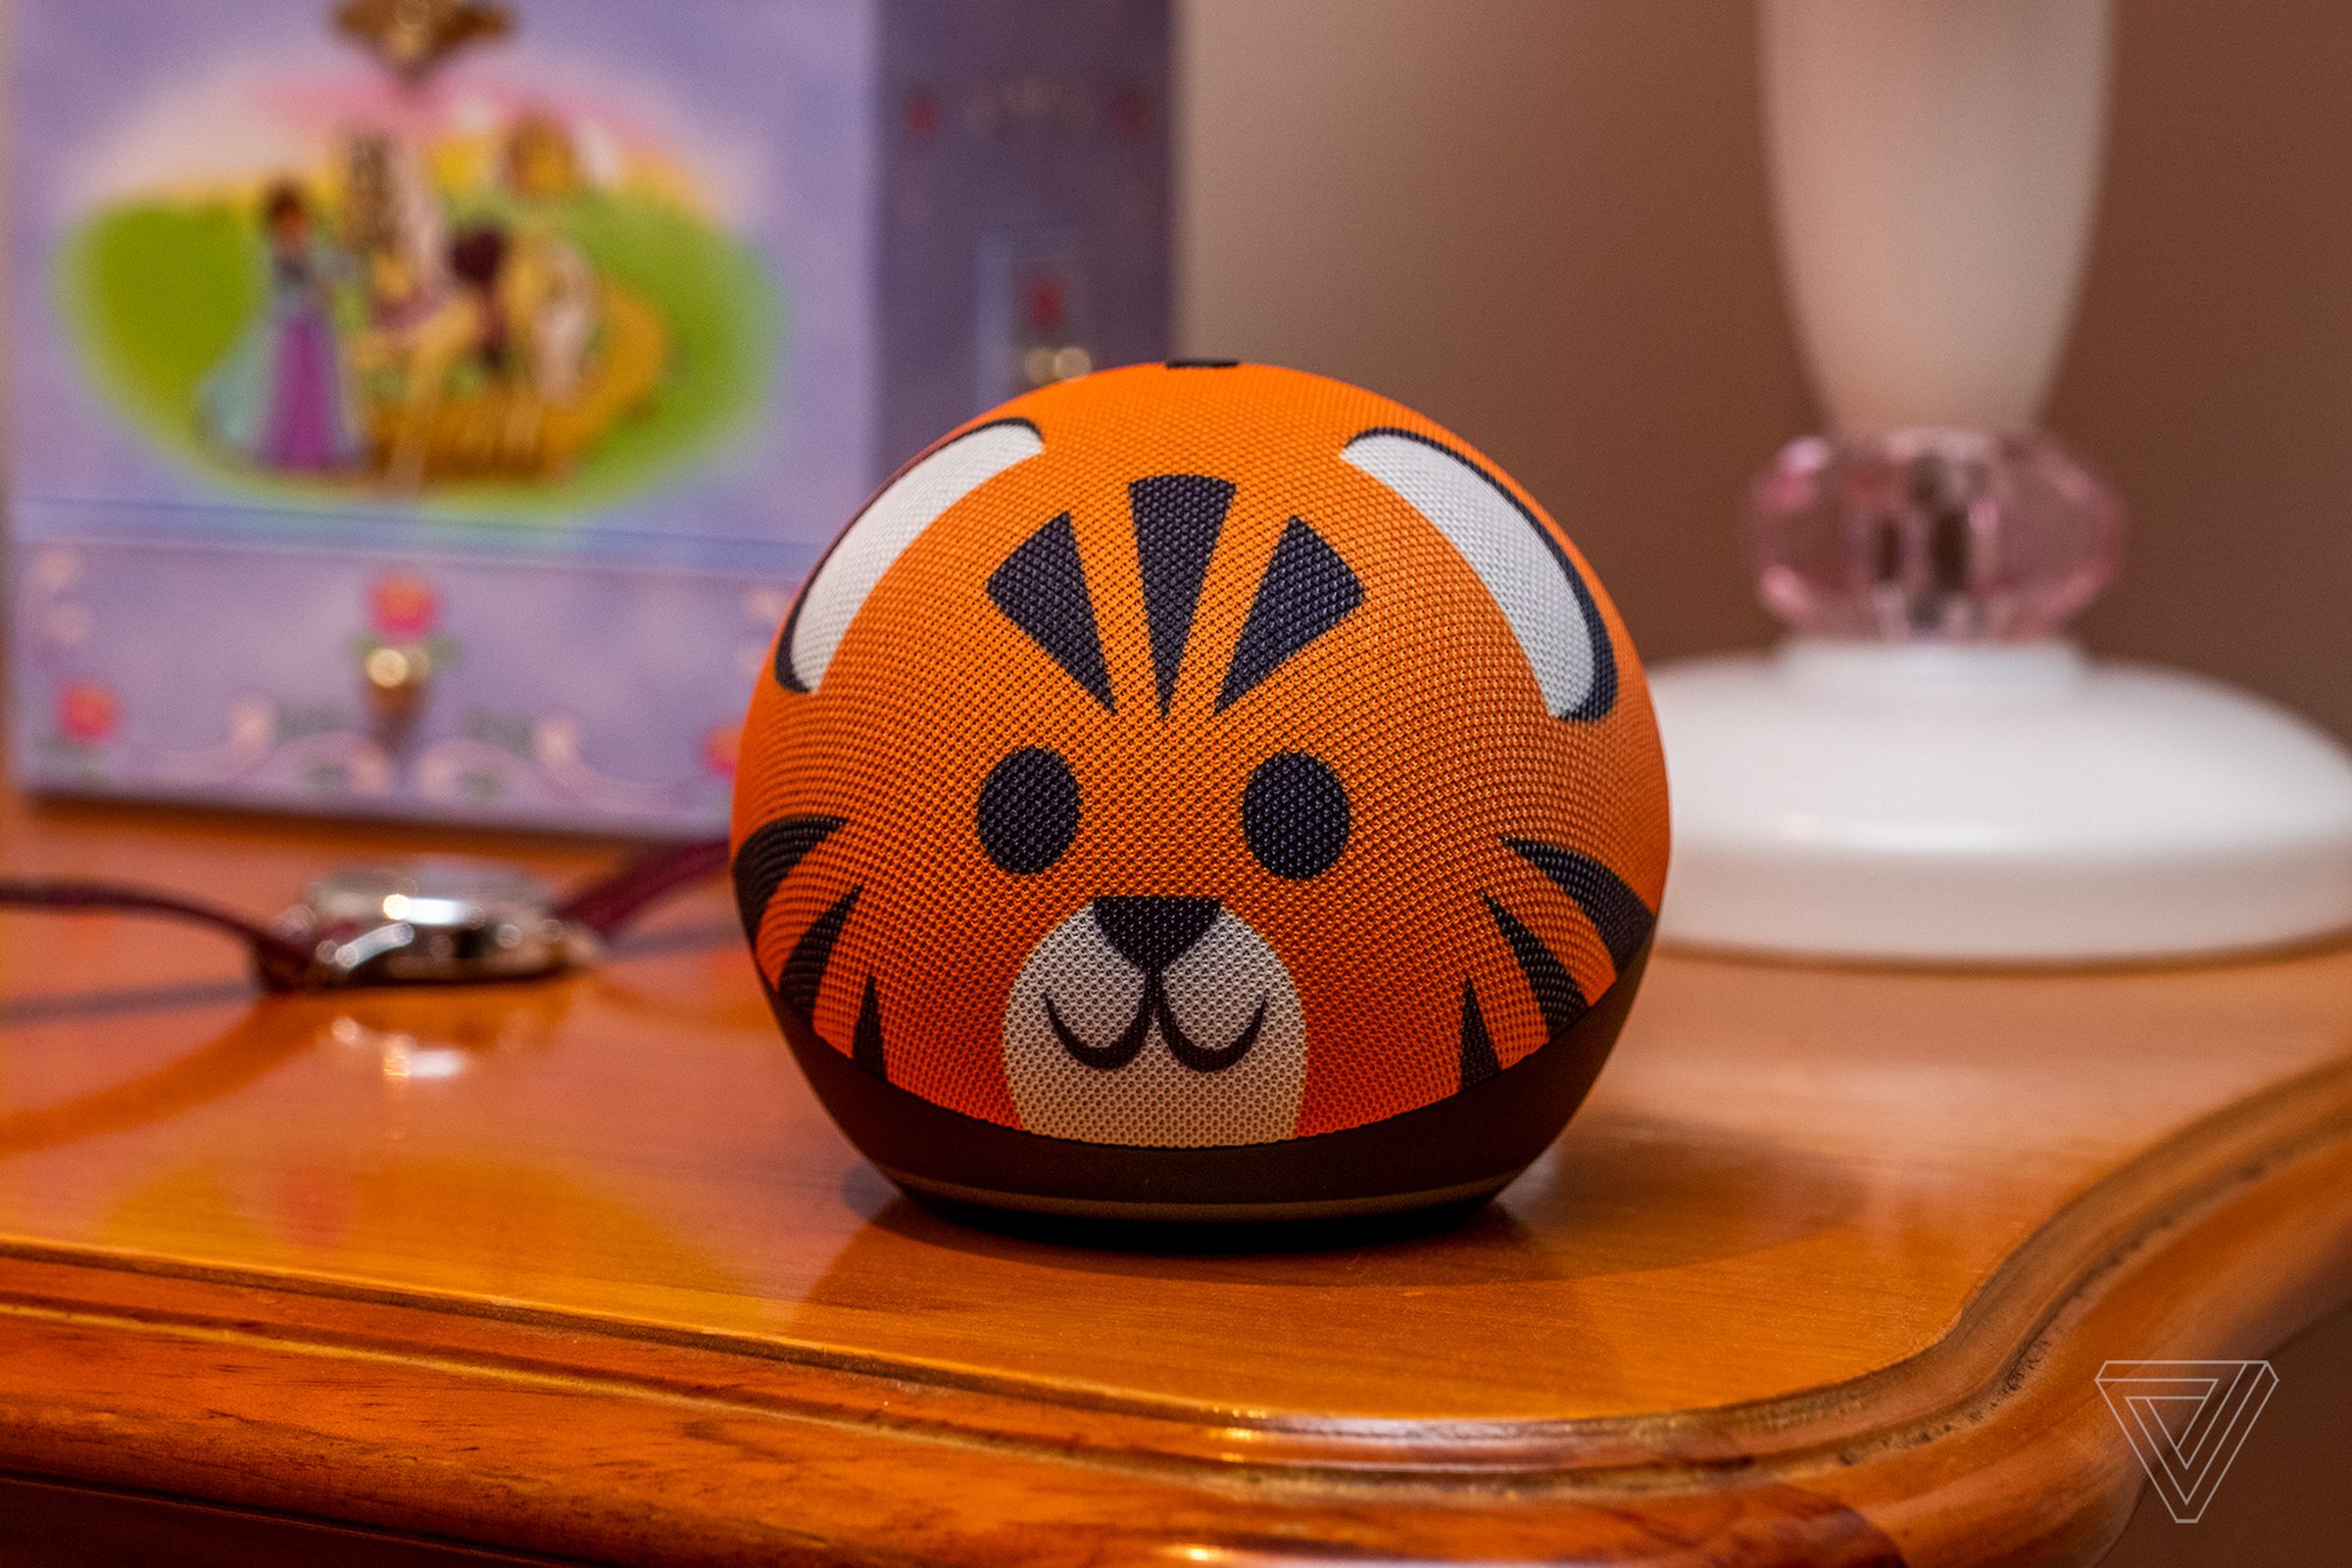 The new Kids Edition Echo Dot is available in a tiger or panda design.